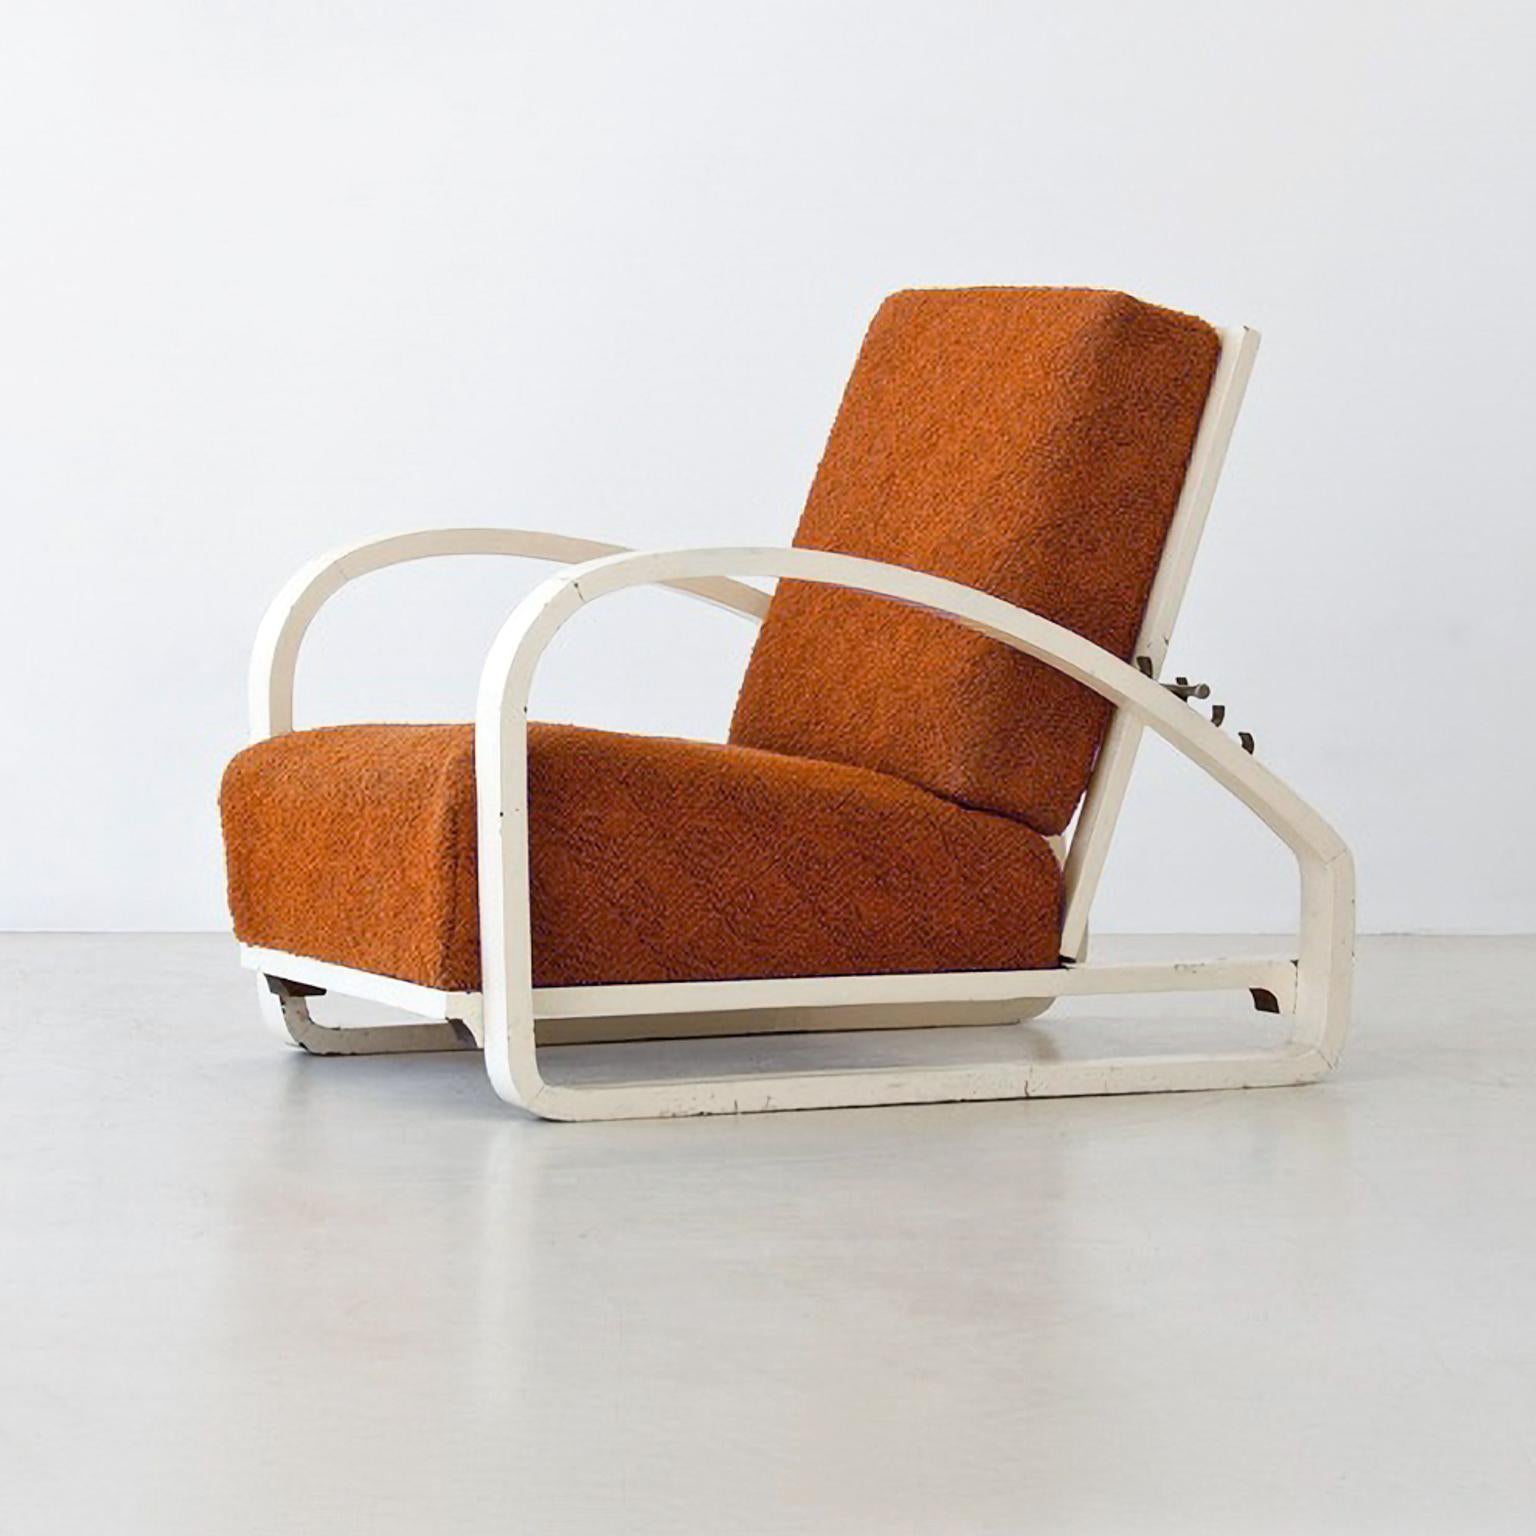 German Modernist Recliner Armchair, Molded Wood, Upholstered Cushions, Customizable For Sale